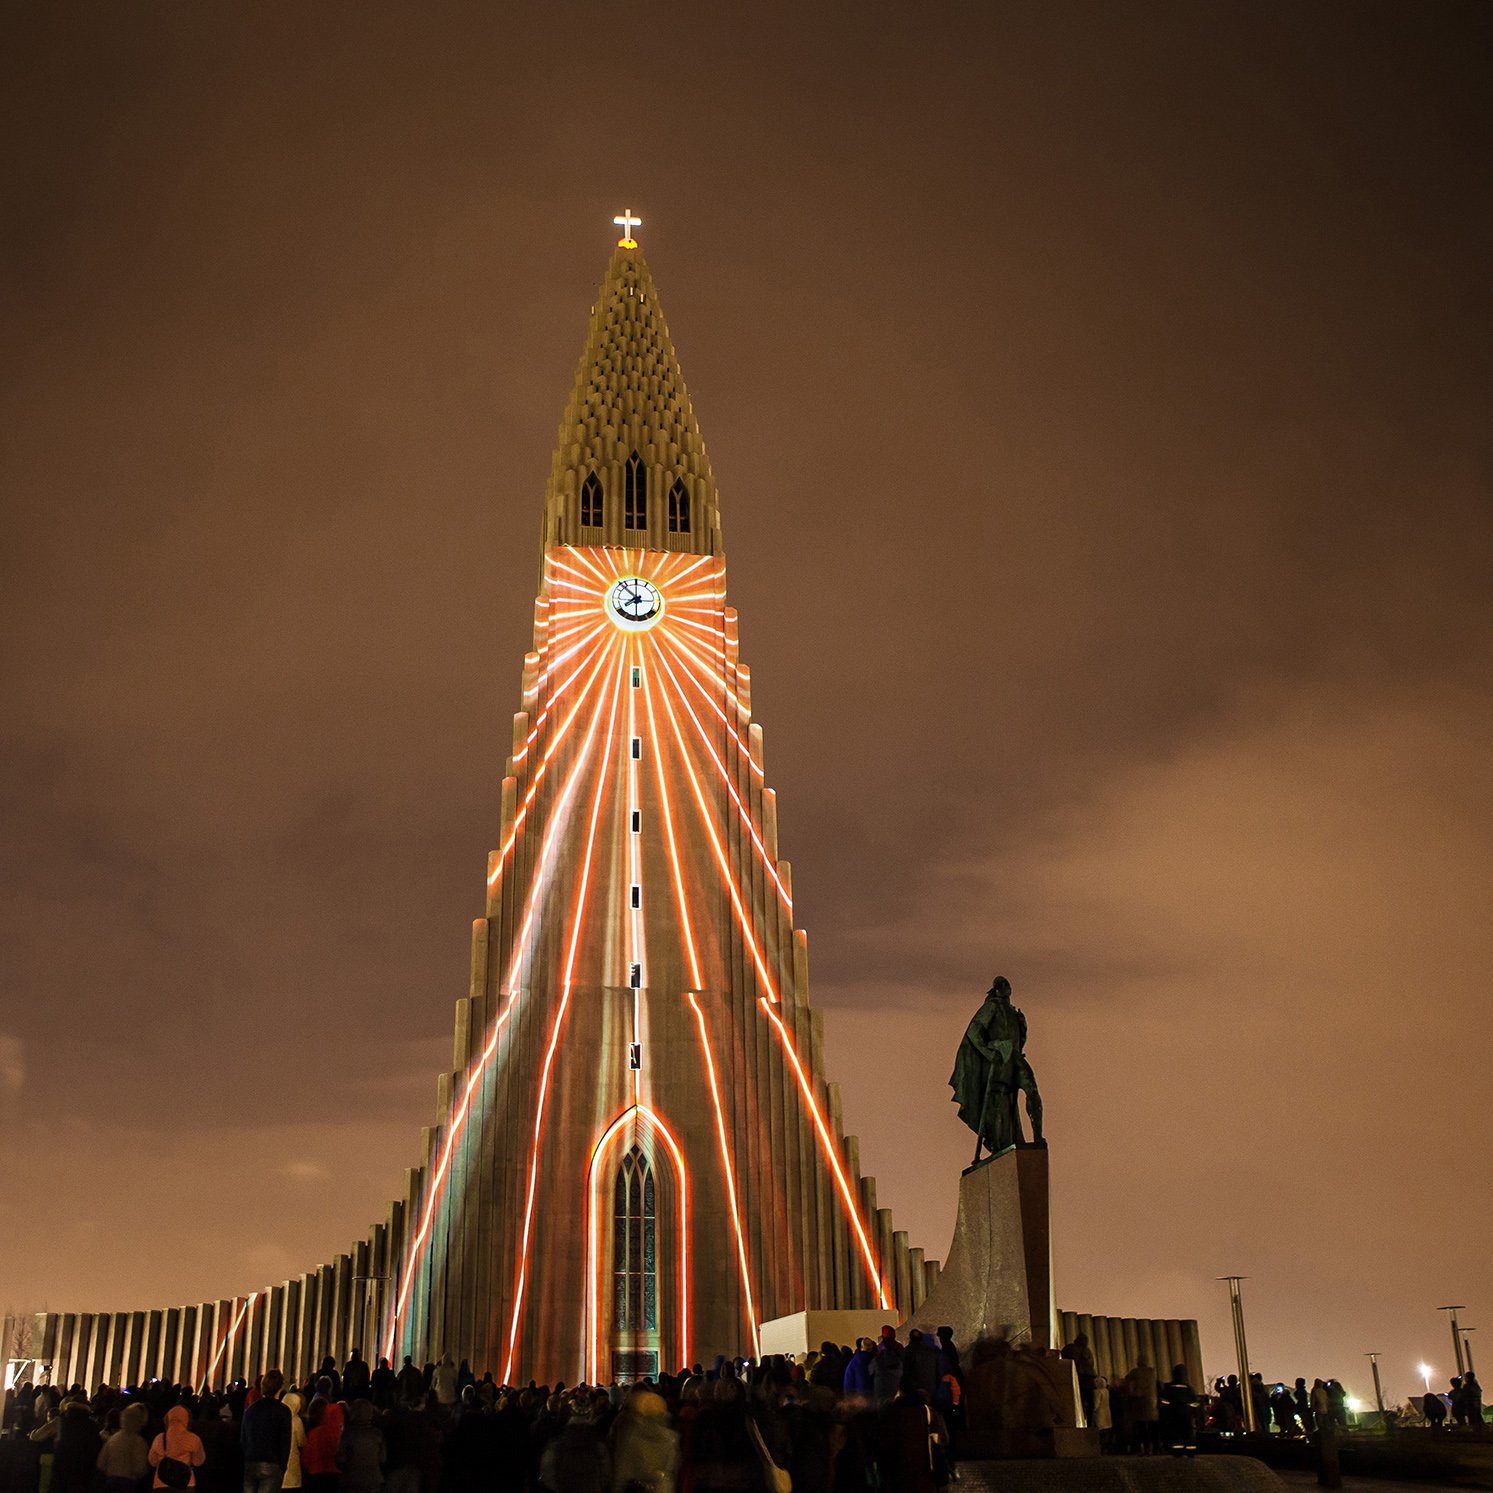 The Hallgrimskirkja Church, which towers over the capital of Reykjavik, is among the many architectural structures to visit in Iceland.